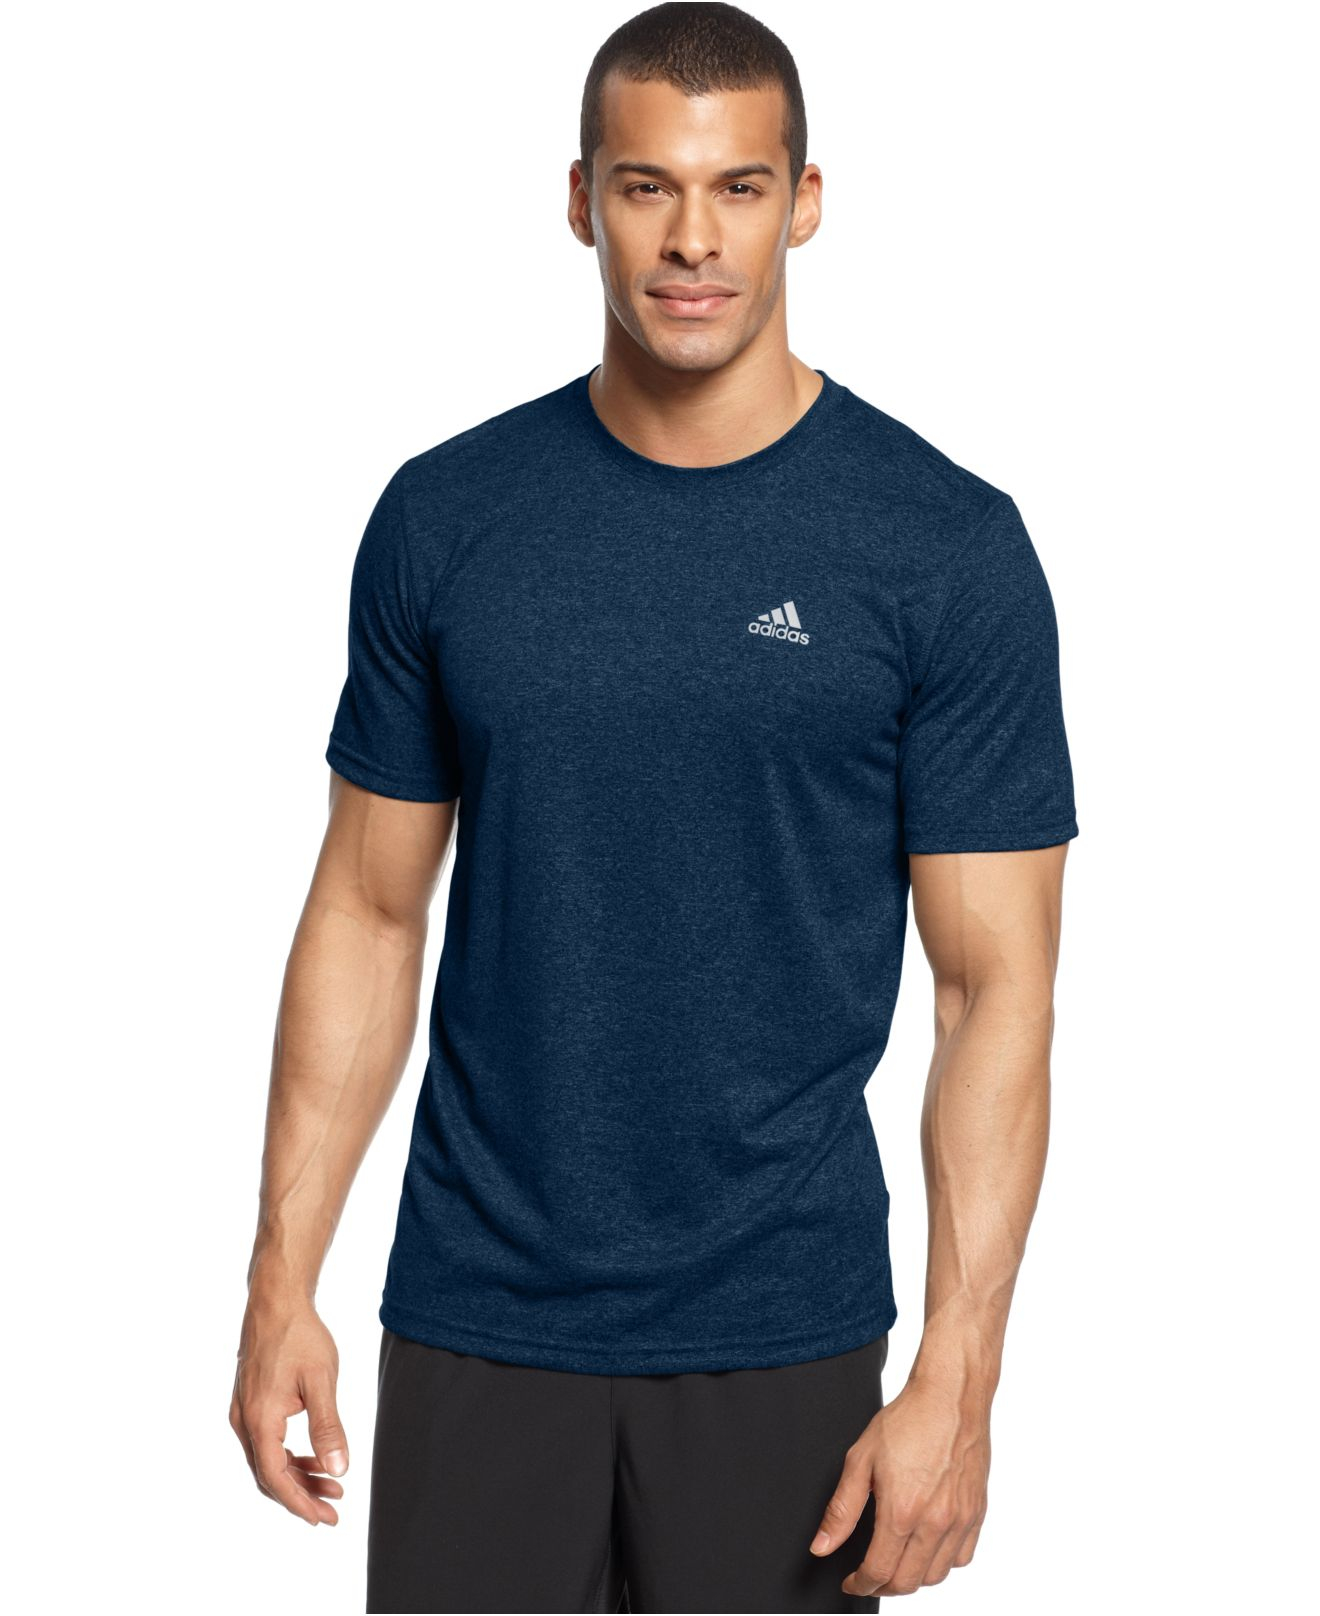 Lyst - Adidas Climalite Short-Sleeve T-Shirt in Blue for Men